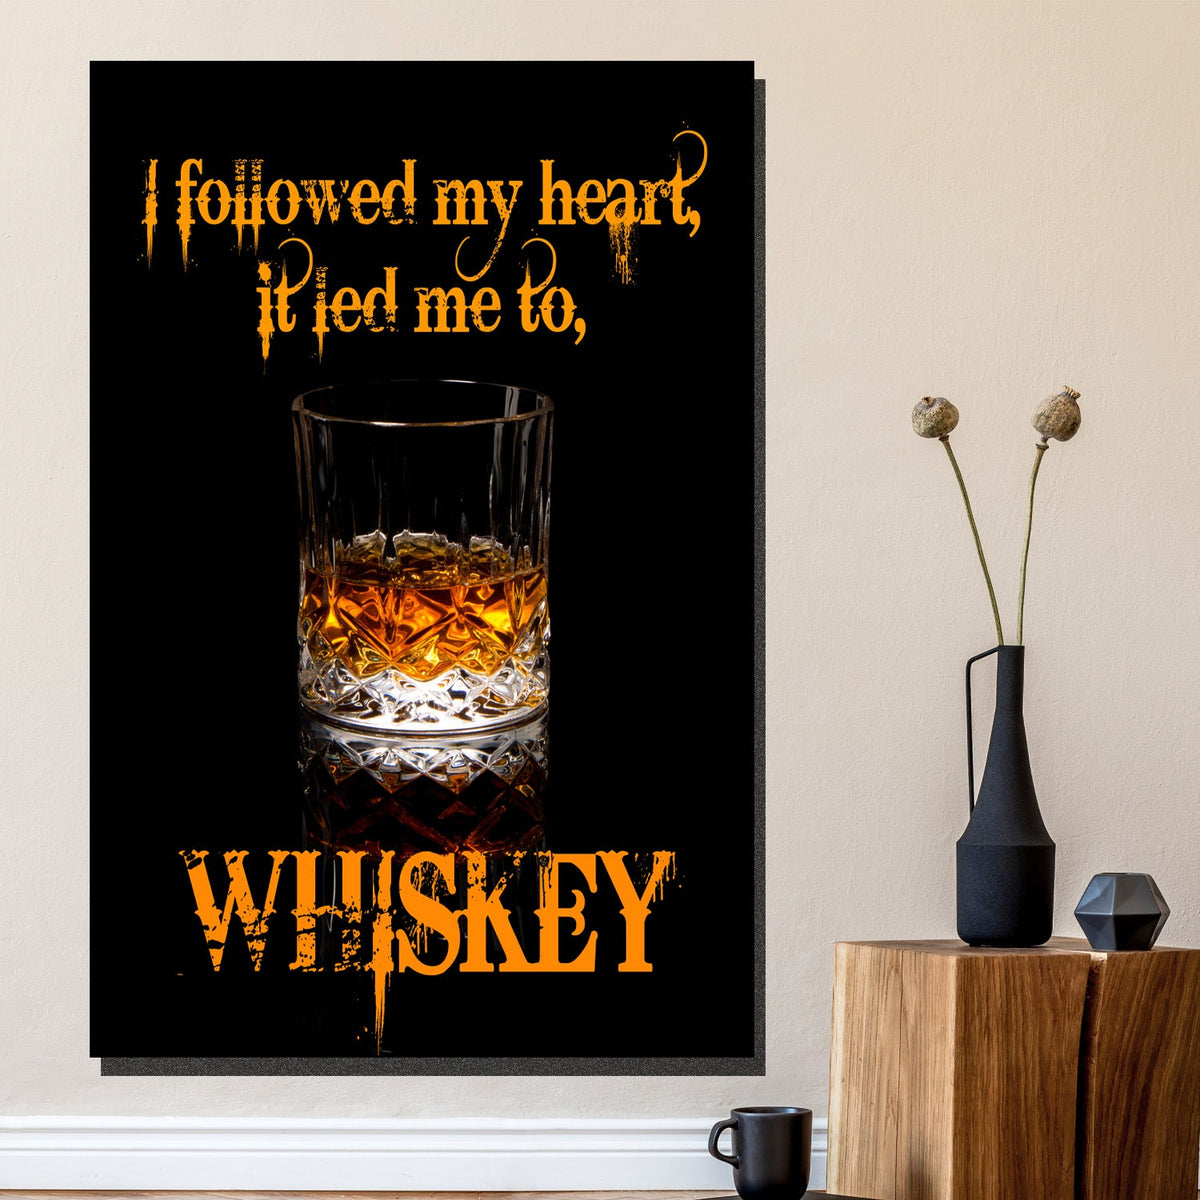 https://cdn.shopify.com/s/files/1/0387/9986/8044/products/WhiskeyQuoteCanvasArtprintStretched-2.jpg